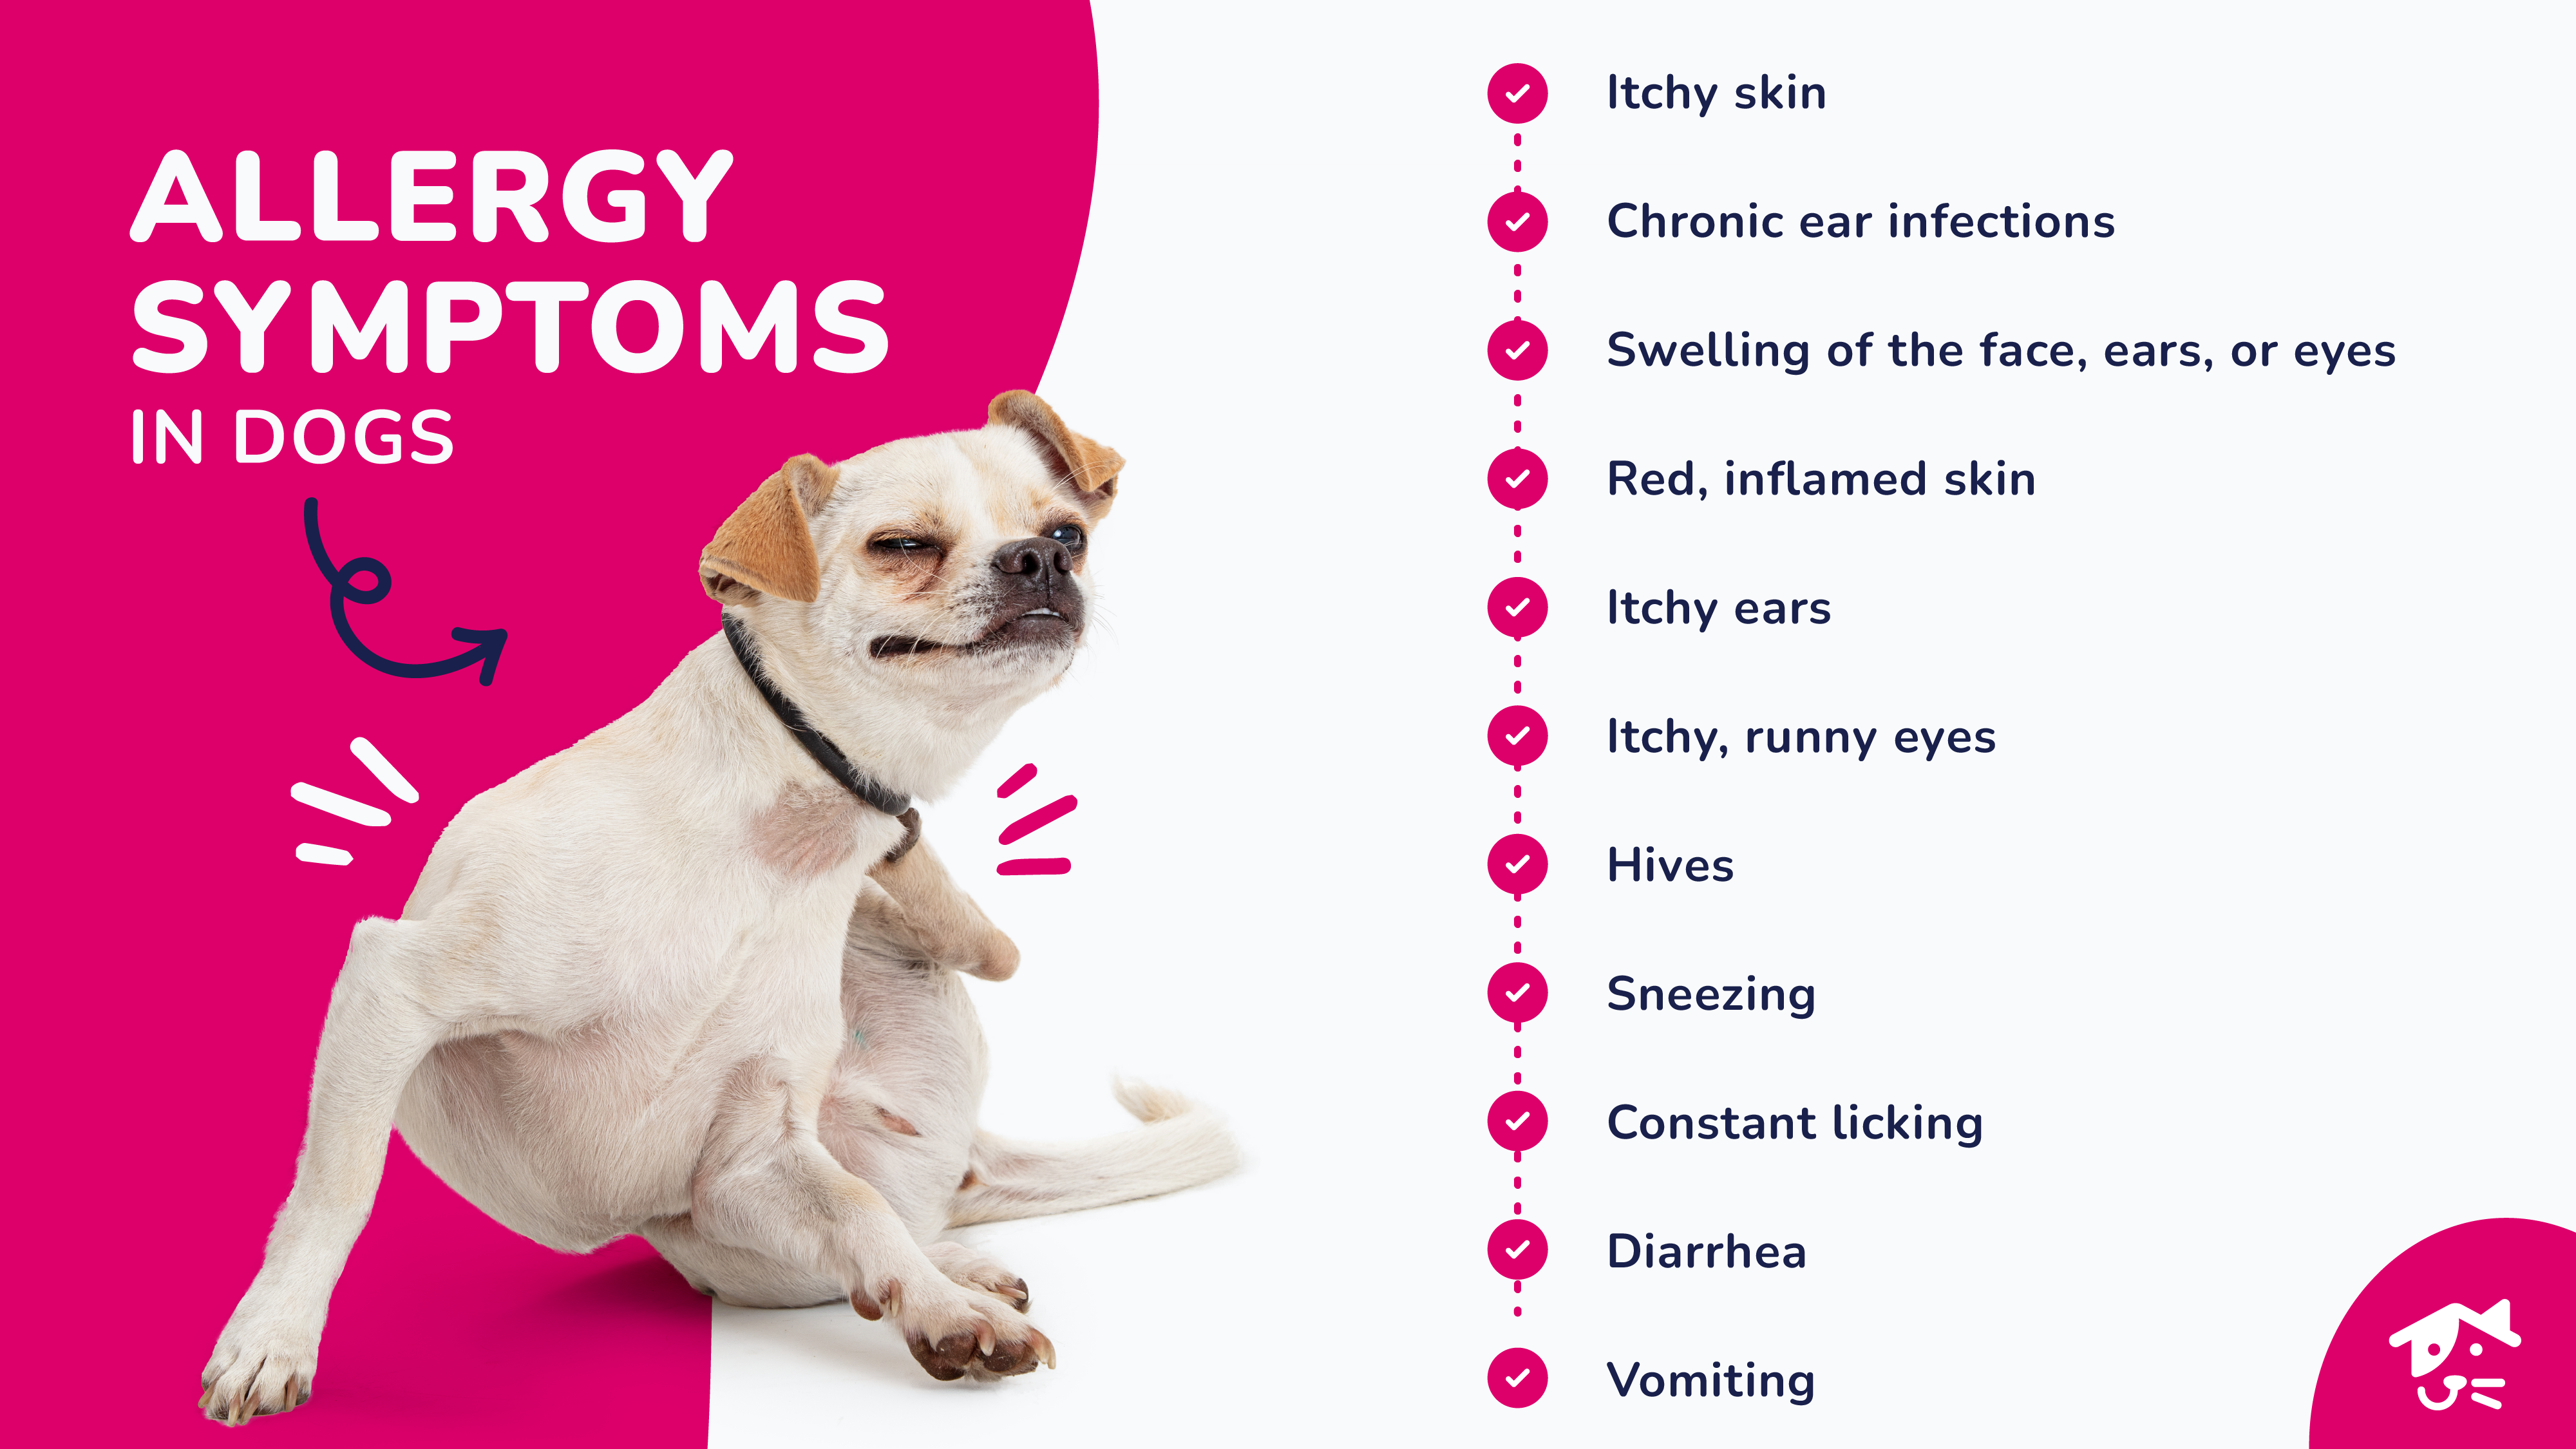 An infographic of the most common allergy symptoms in dogs.